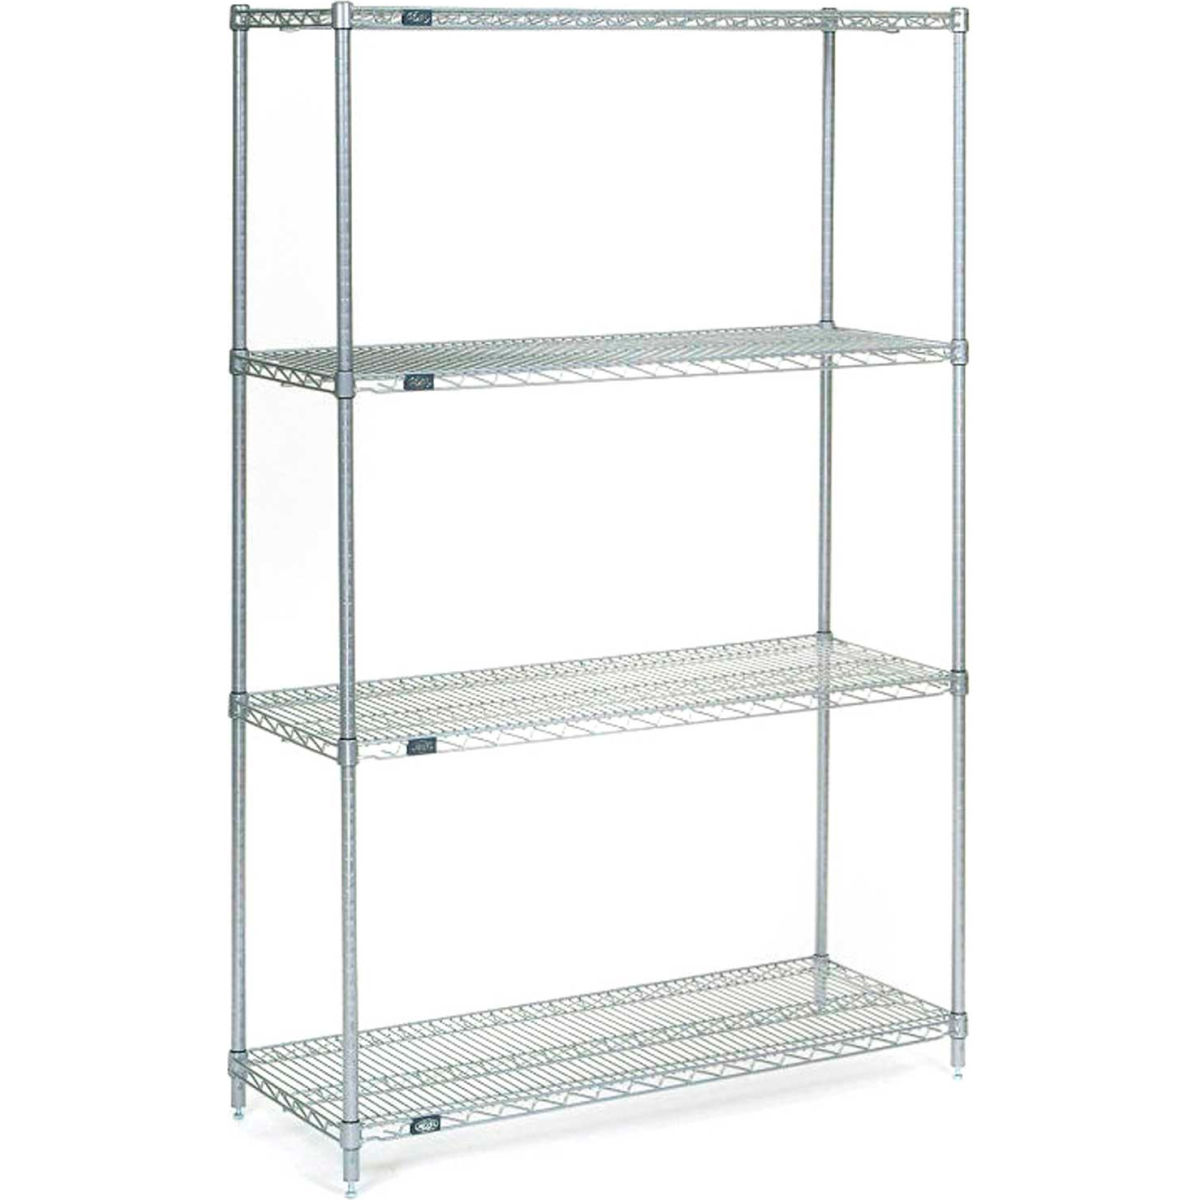 Picture of Global Industrial 14368S5 86 x 36 x 14 in. Nexel Stainless Steel Starter 5 Tier Wire Shelving